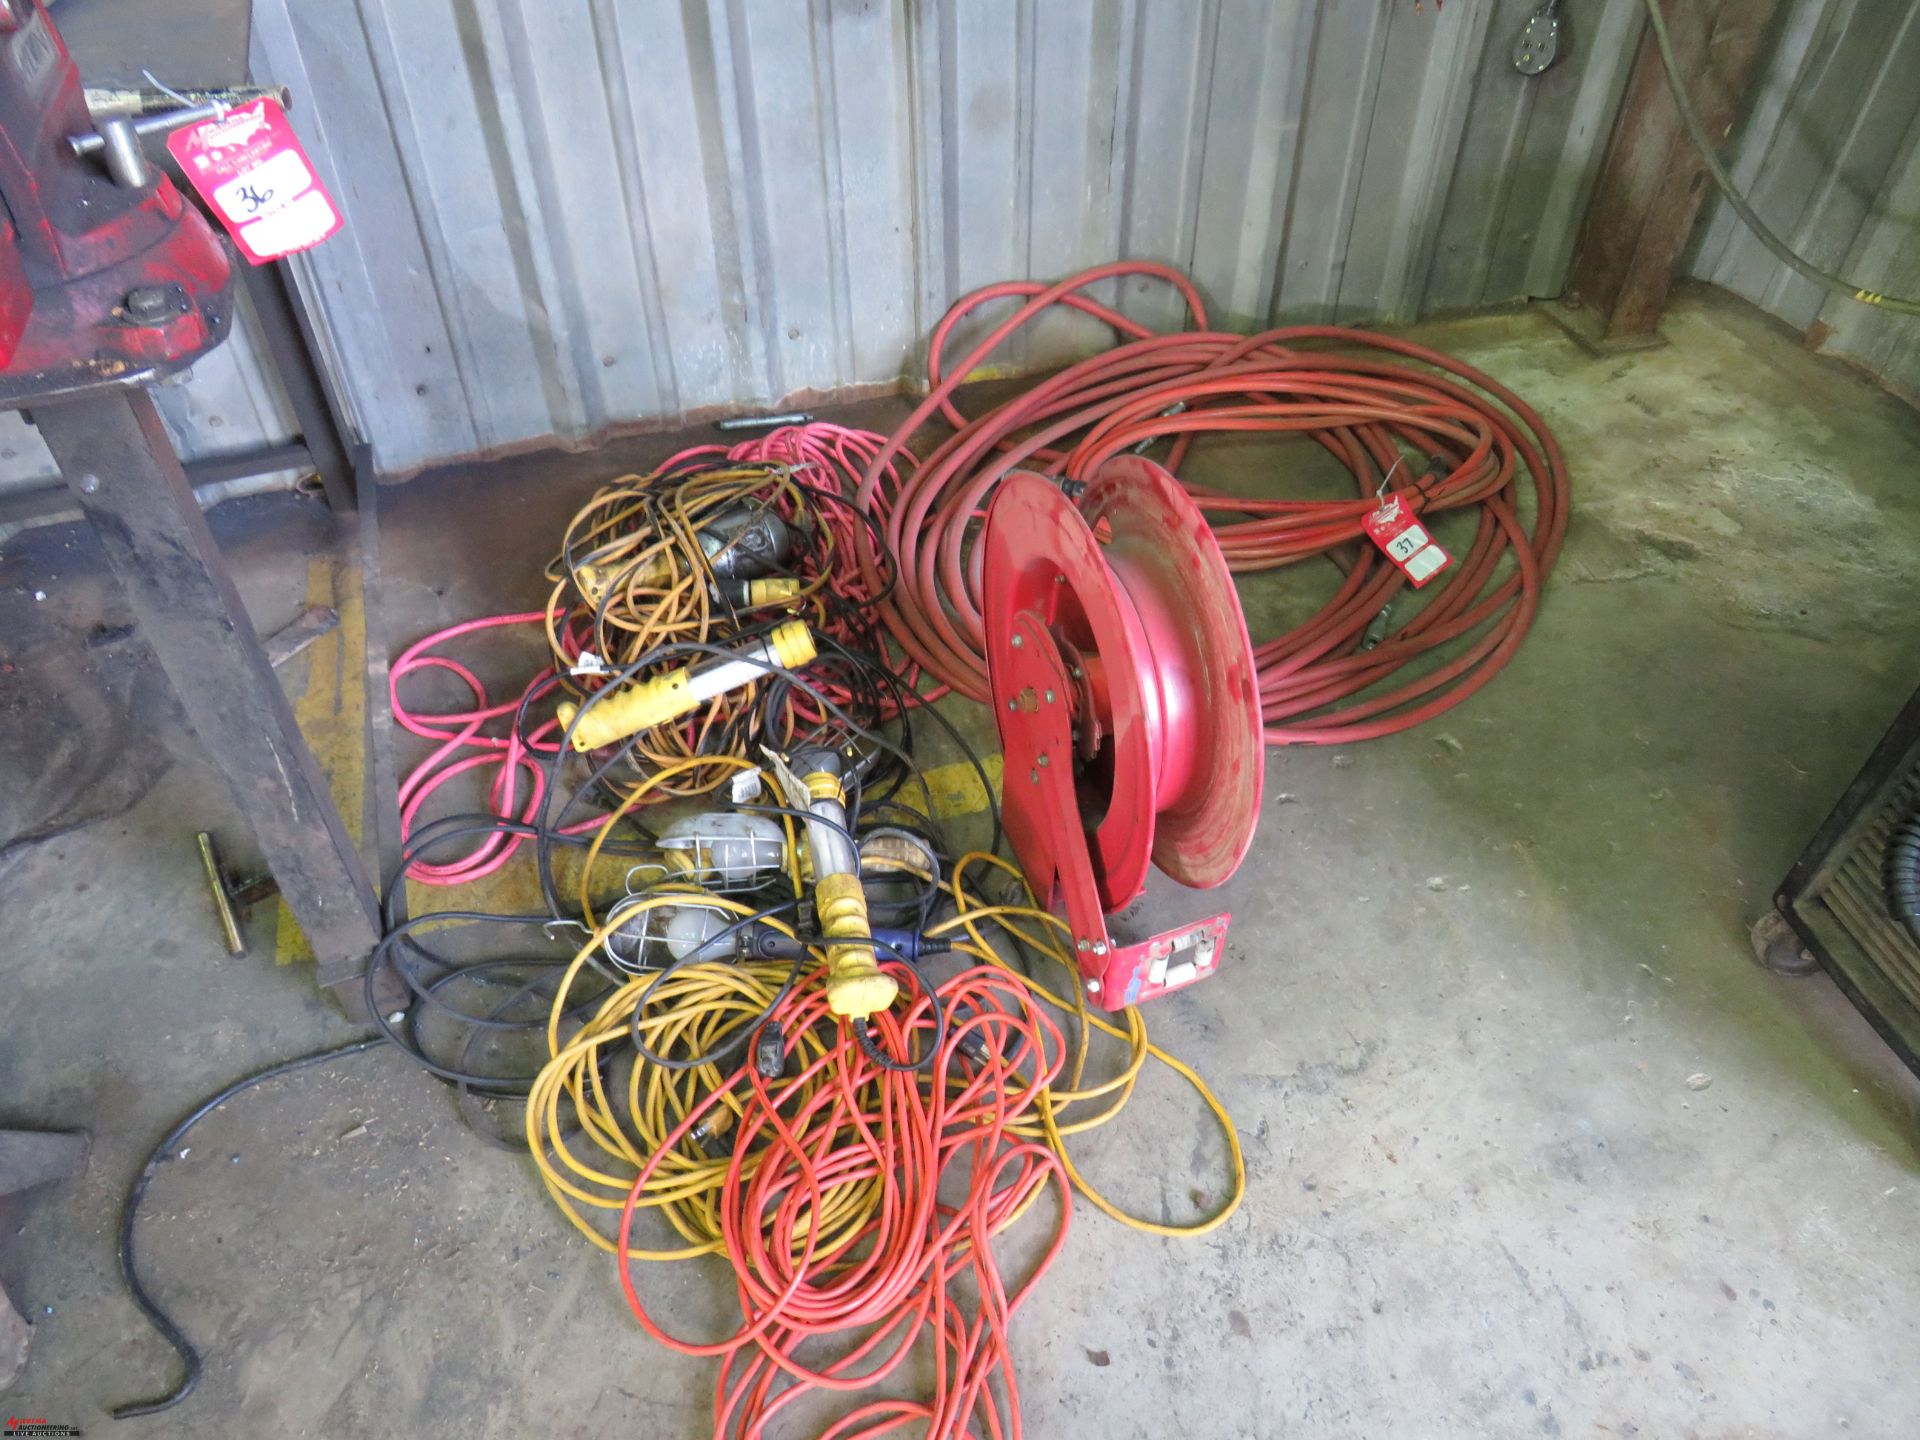 ASSORTED EXTENSION CORDS, AIR HOSES, DROP LIGHTS